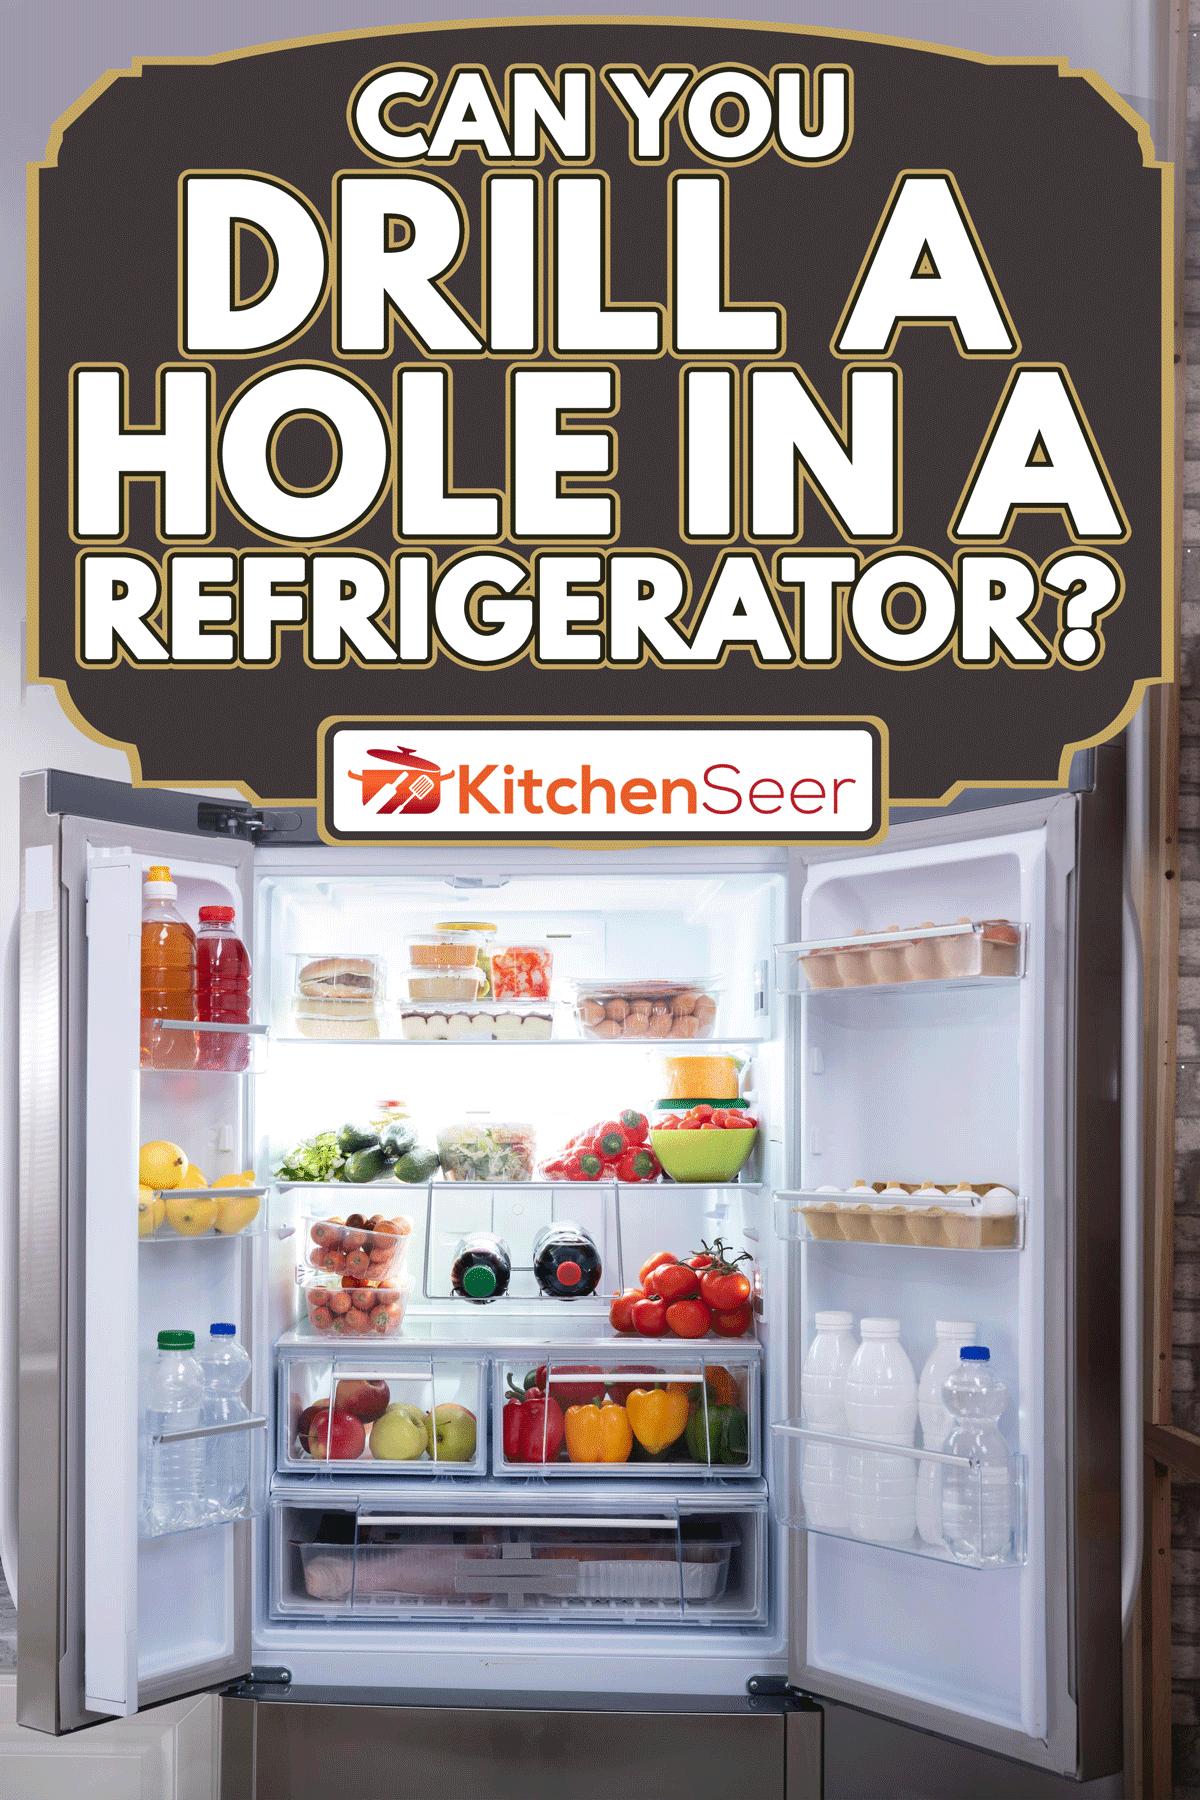 Open refrigerator filled with fresh fruits and vegetables, Can You Drill A Hole In A Refrigerator?